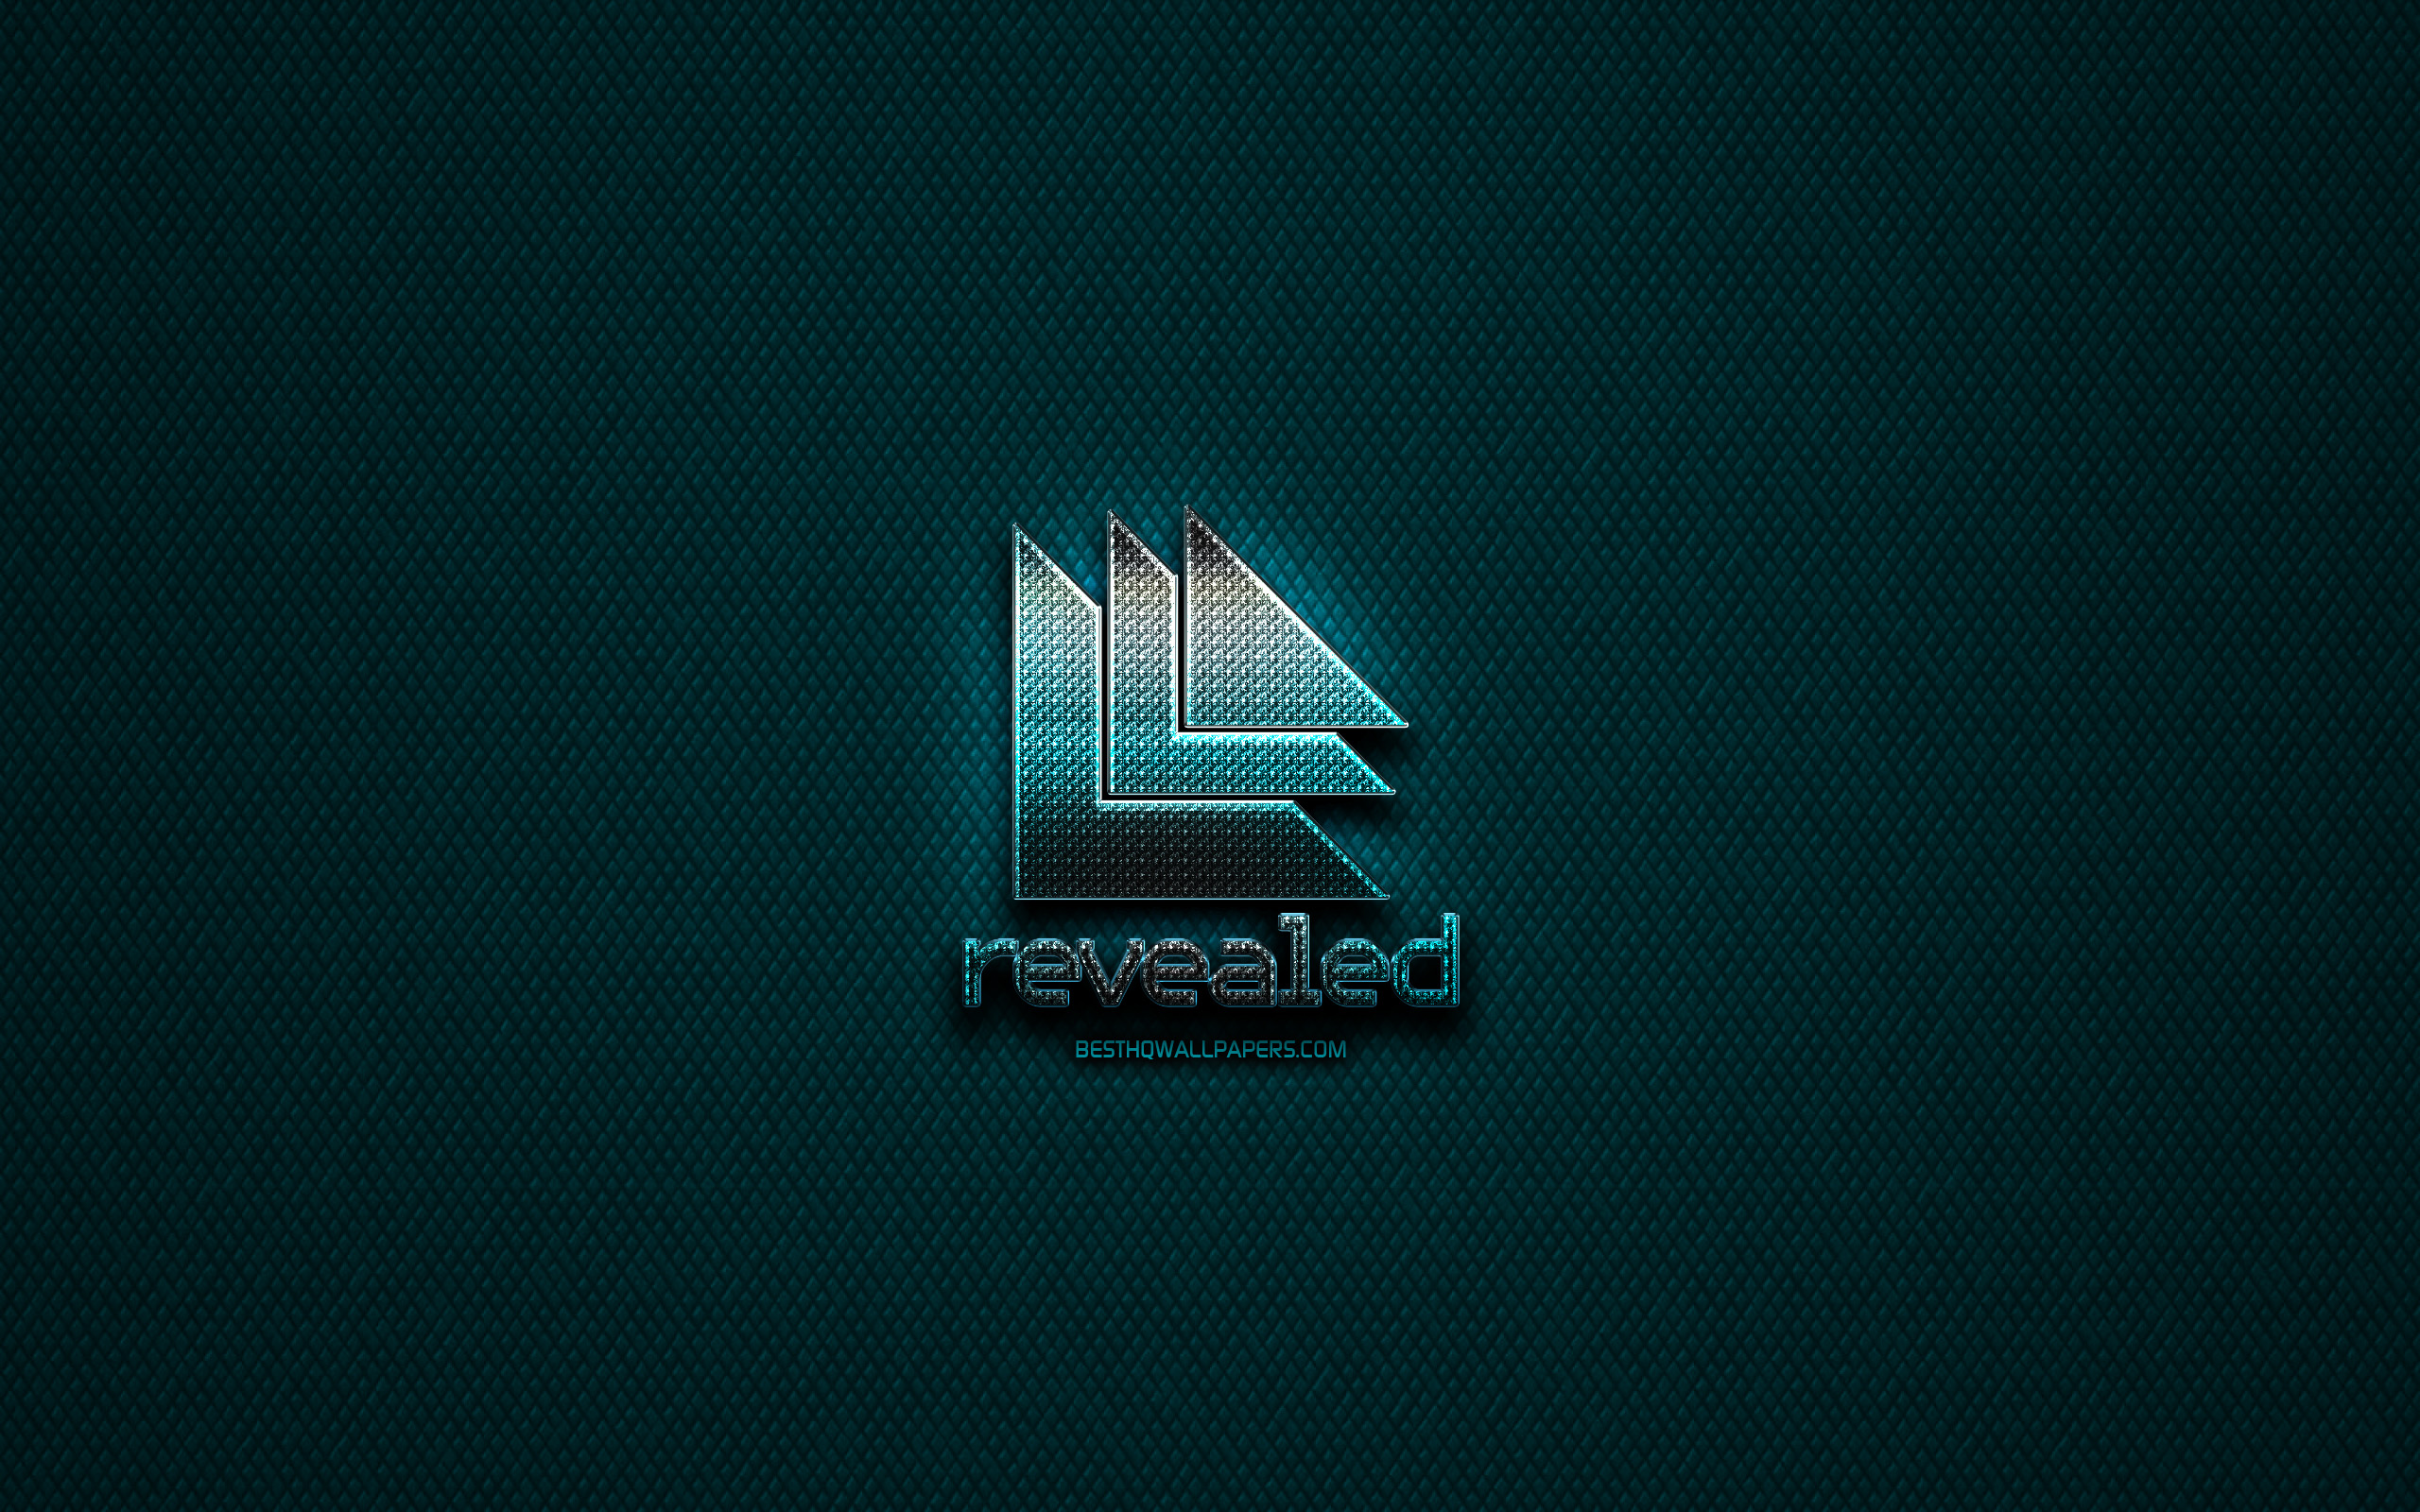 Revealed Recordings Wallpapers